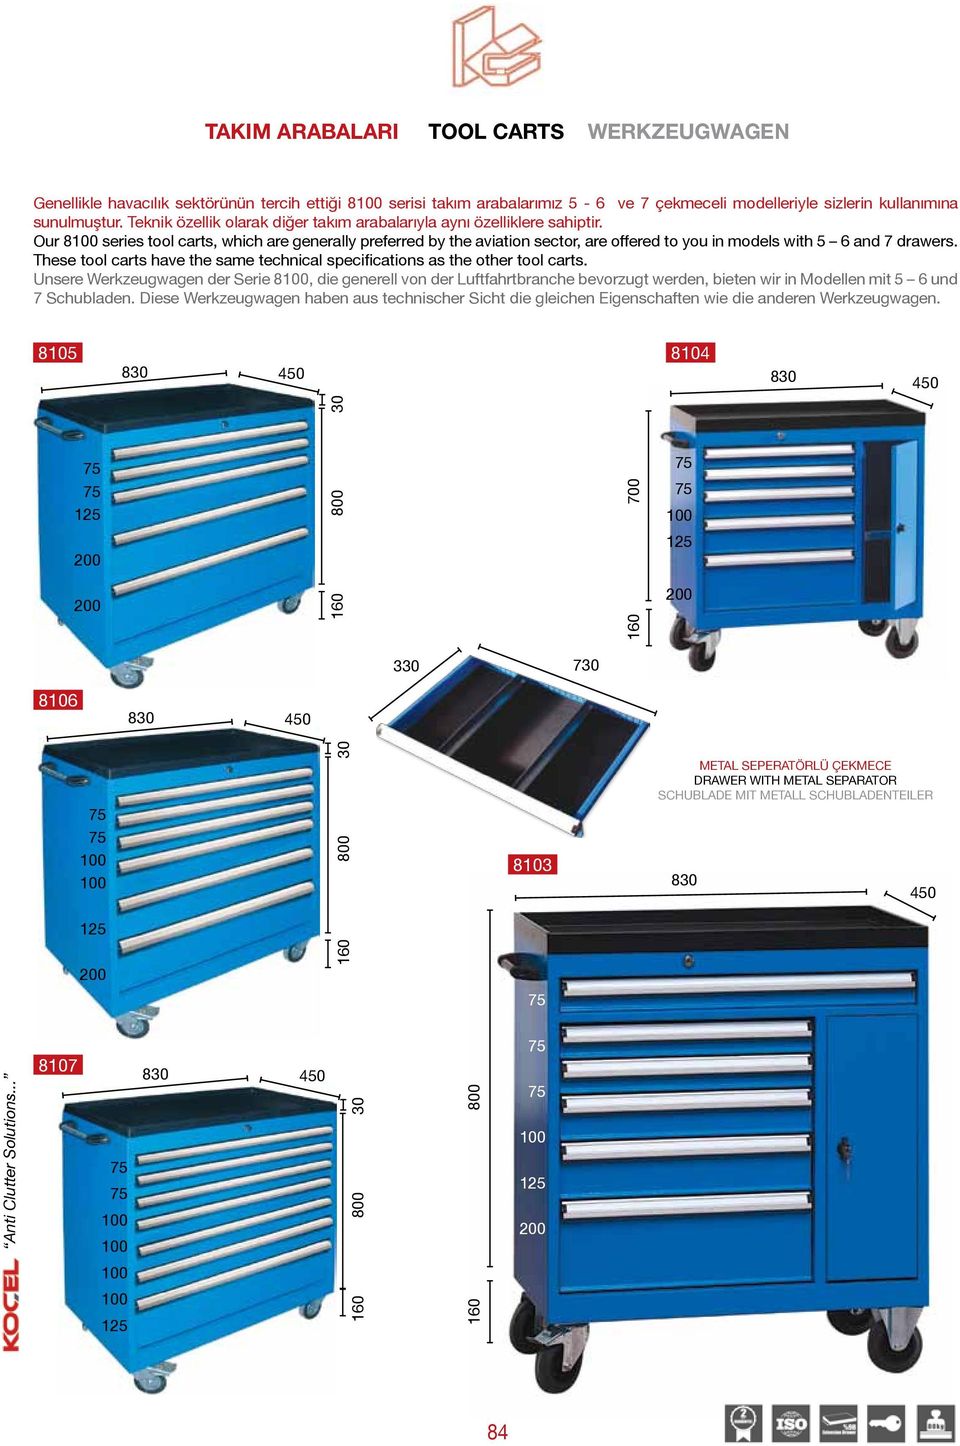 Our 8 series tool carts, which are generally preferred by the aviation sector, are offered to you in models with 5 6 and 7 drawers.